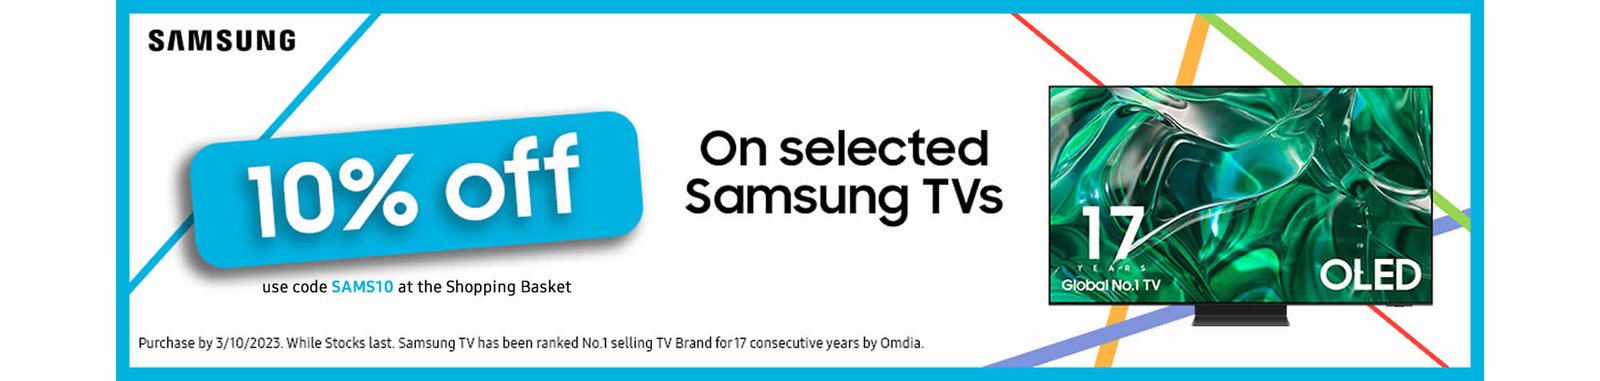 ELECTRICAL DISCOUNT selected samsung